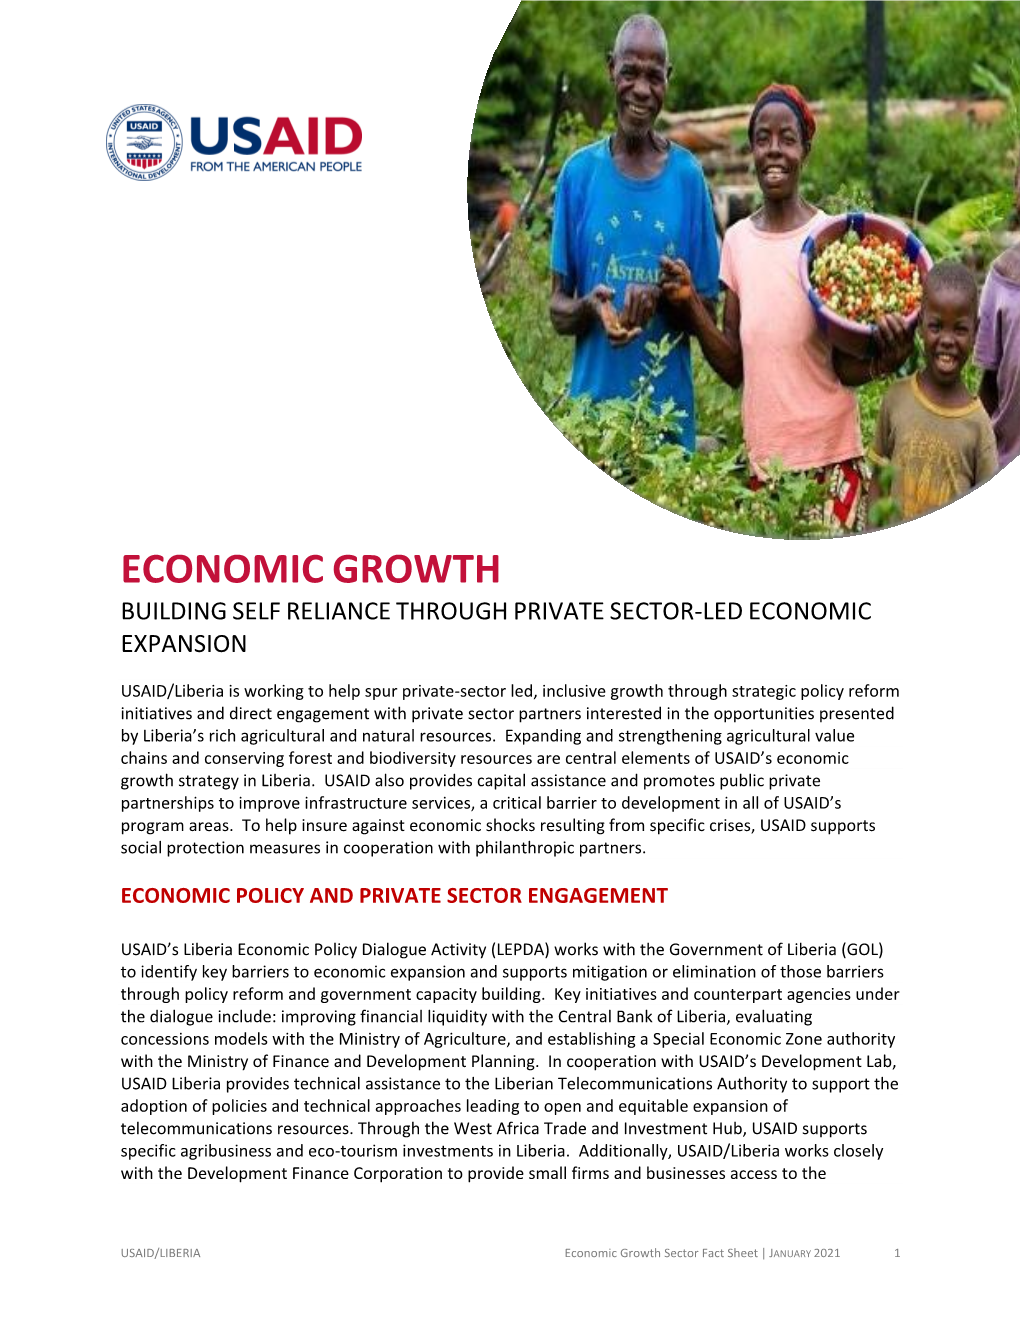 Economic Growth Building Self Reliance Through Private Sector-Led Economic Expansion